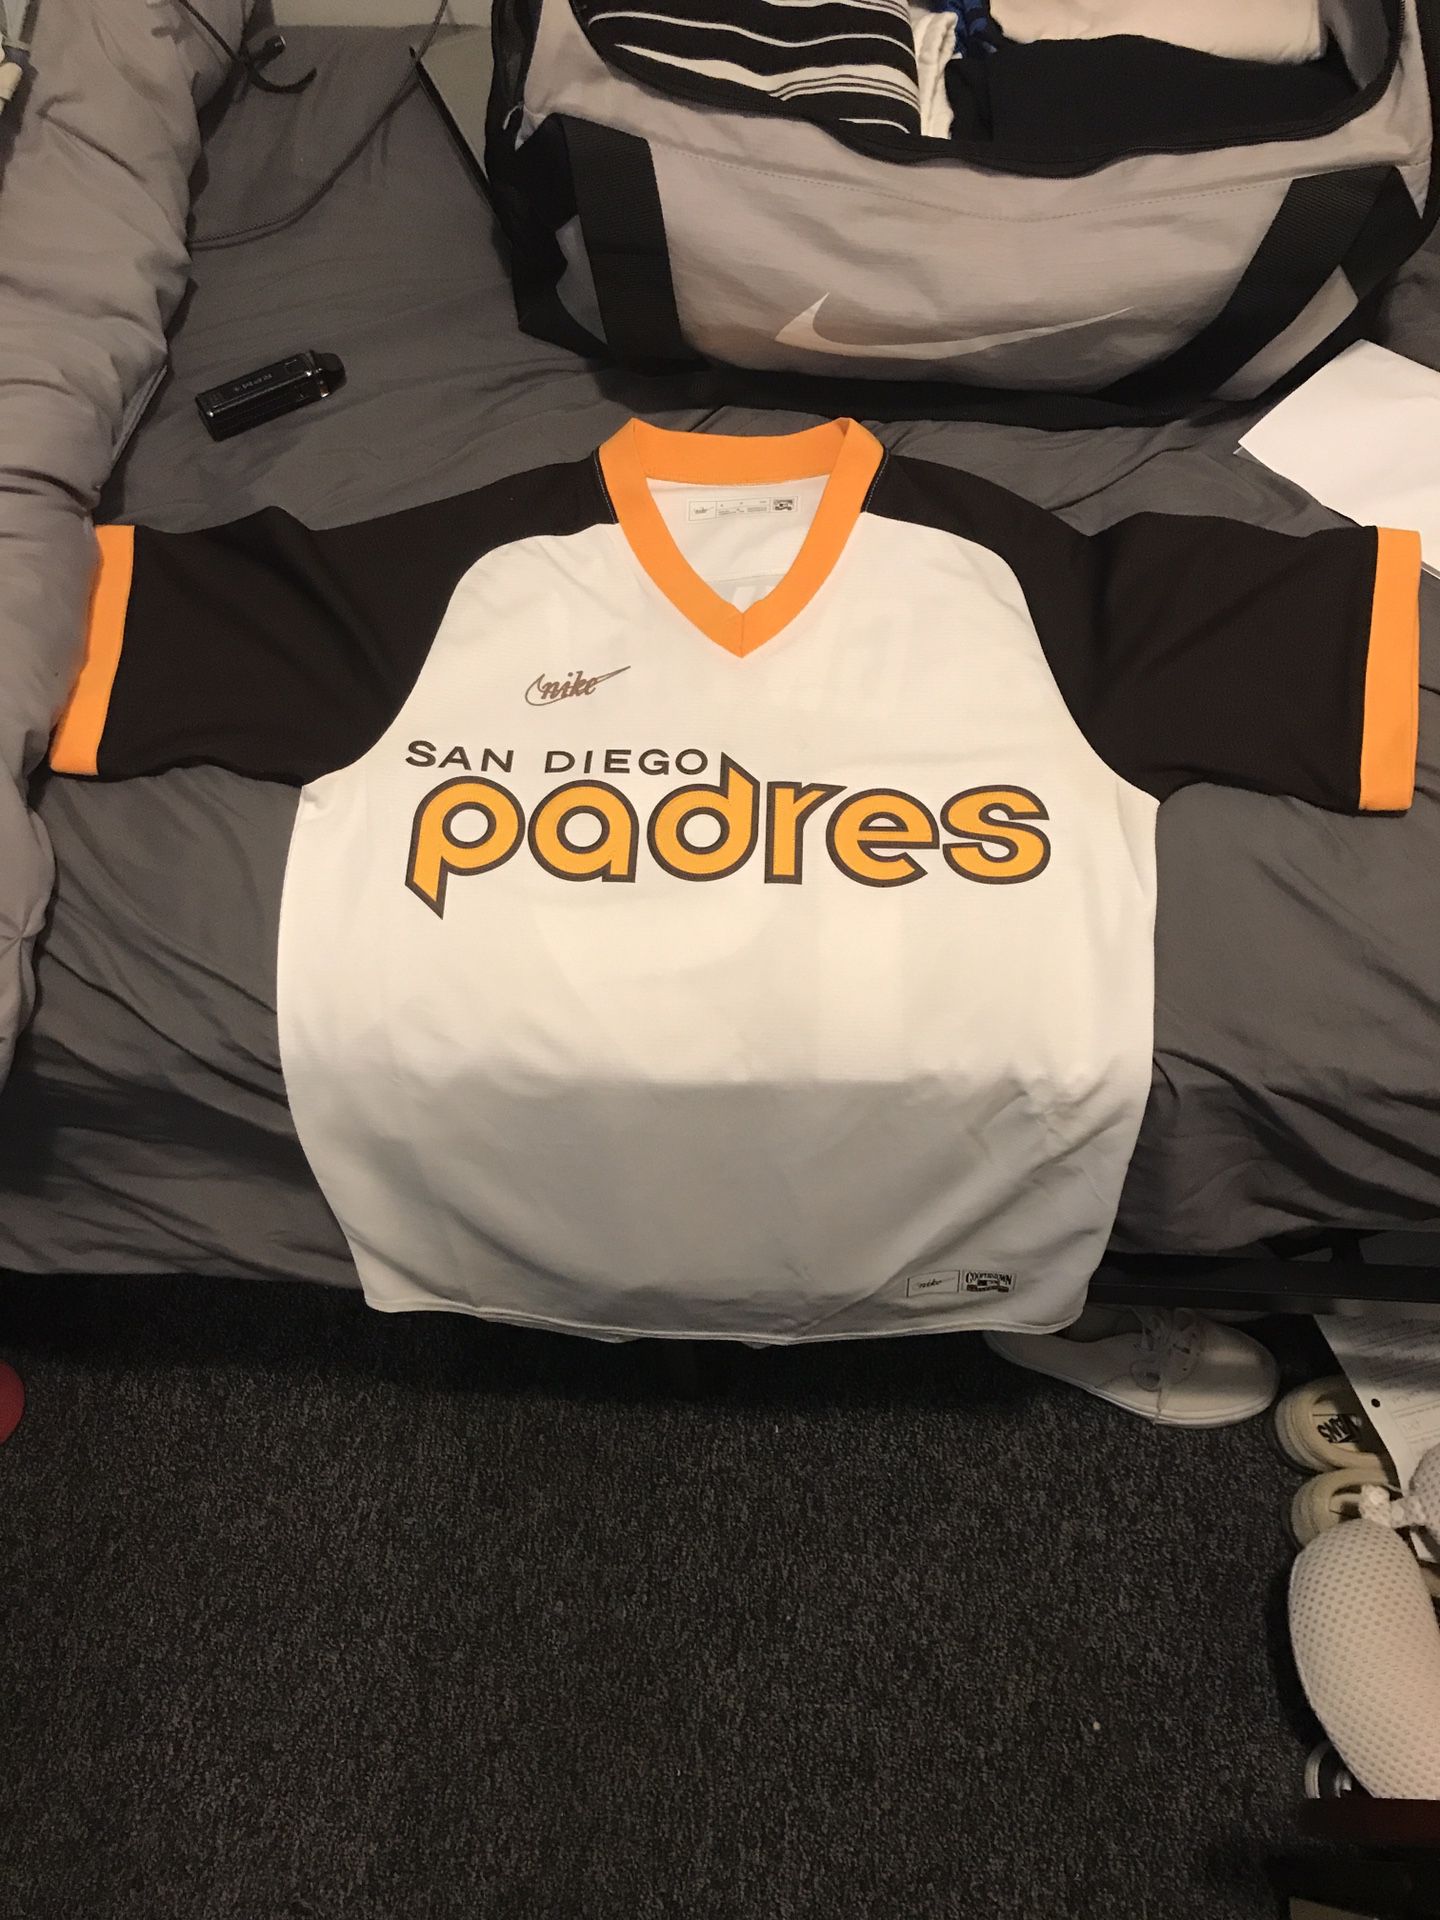 Tony Gwynn Padres Jersey for Sale in San Diego, CA - OfferUp